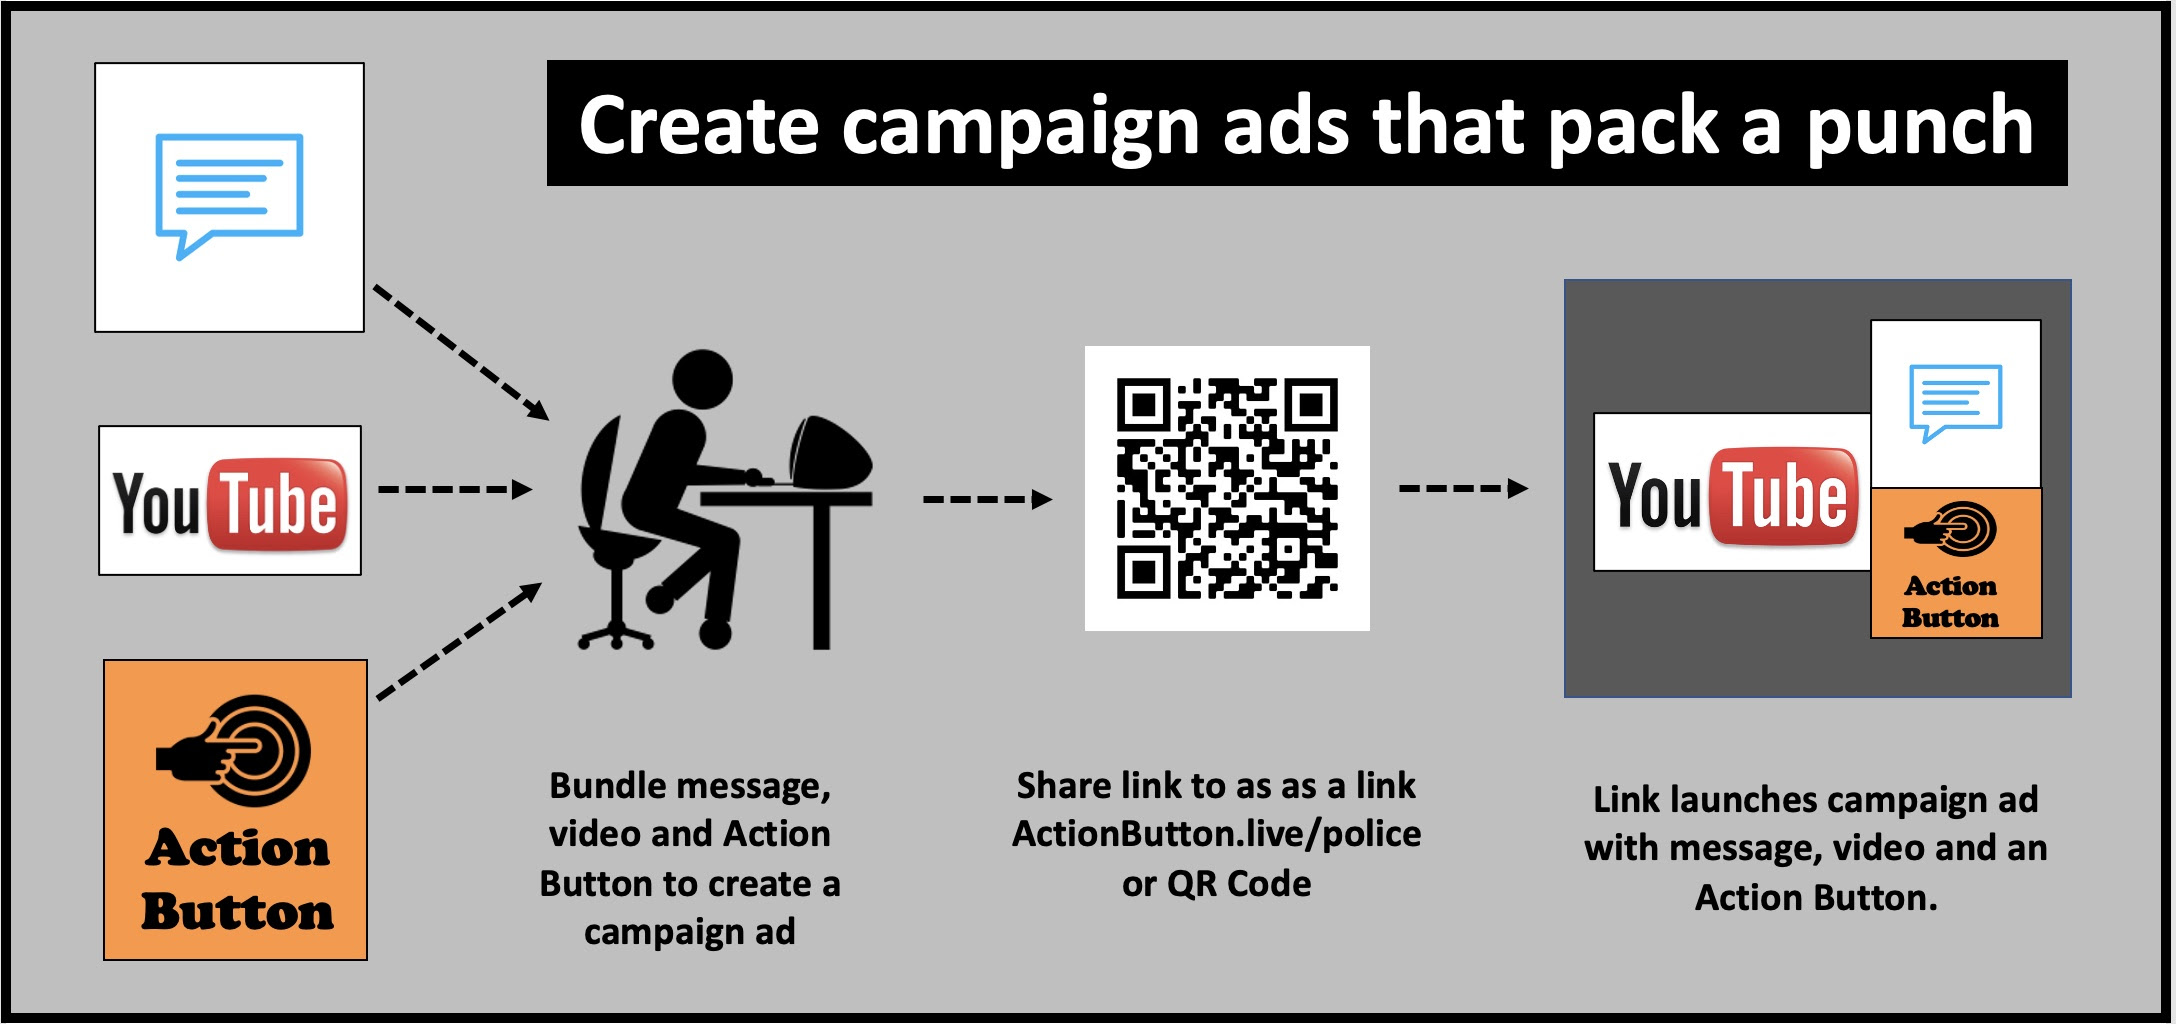 How to create a campaign ad that combines your message, an embedded YouTube video and a call to Action Button.